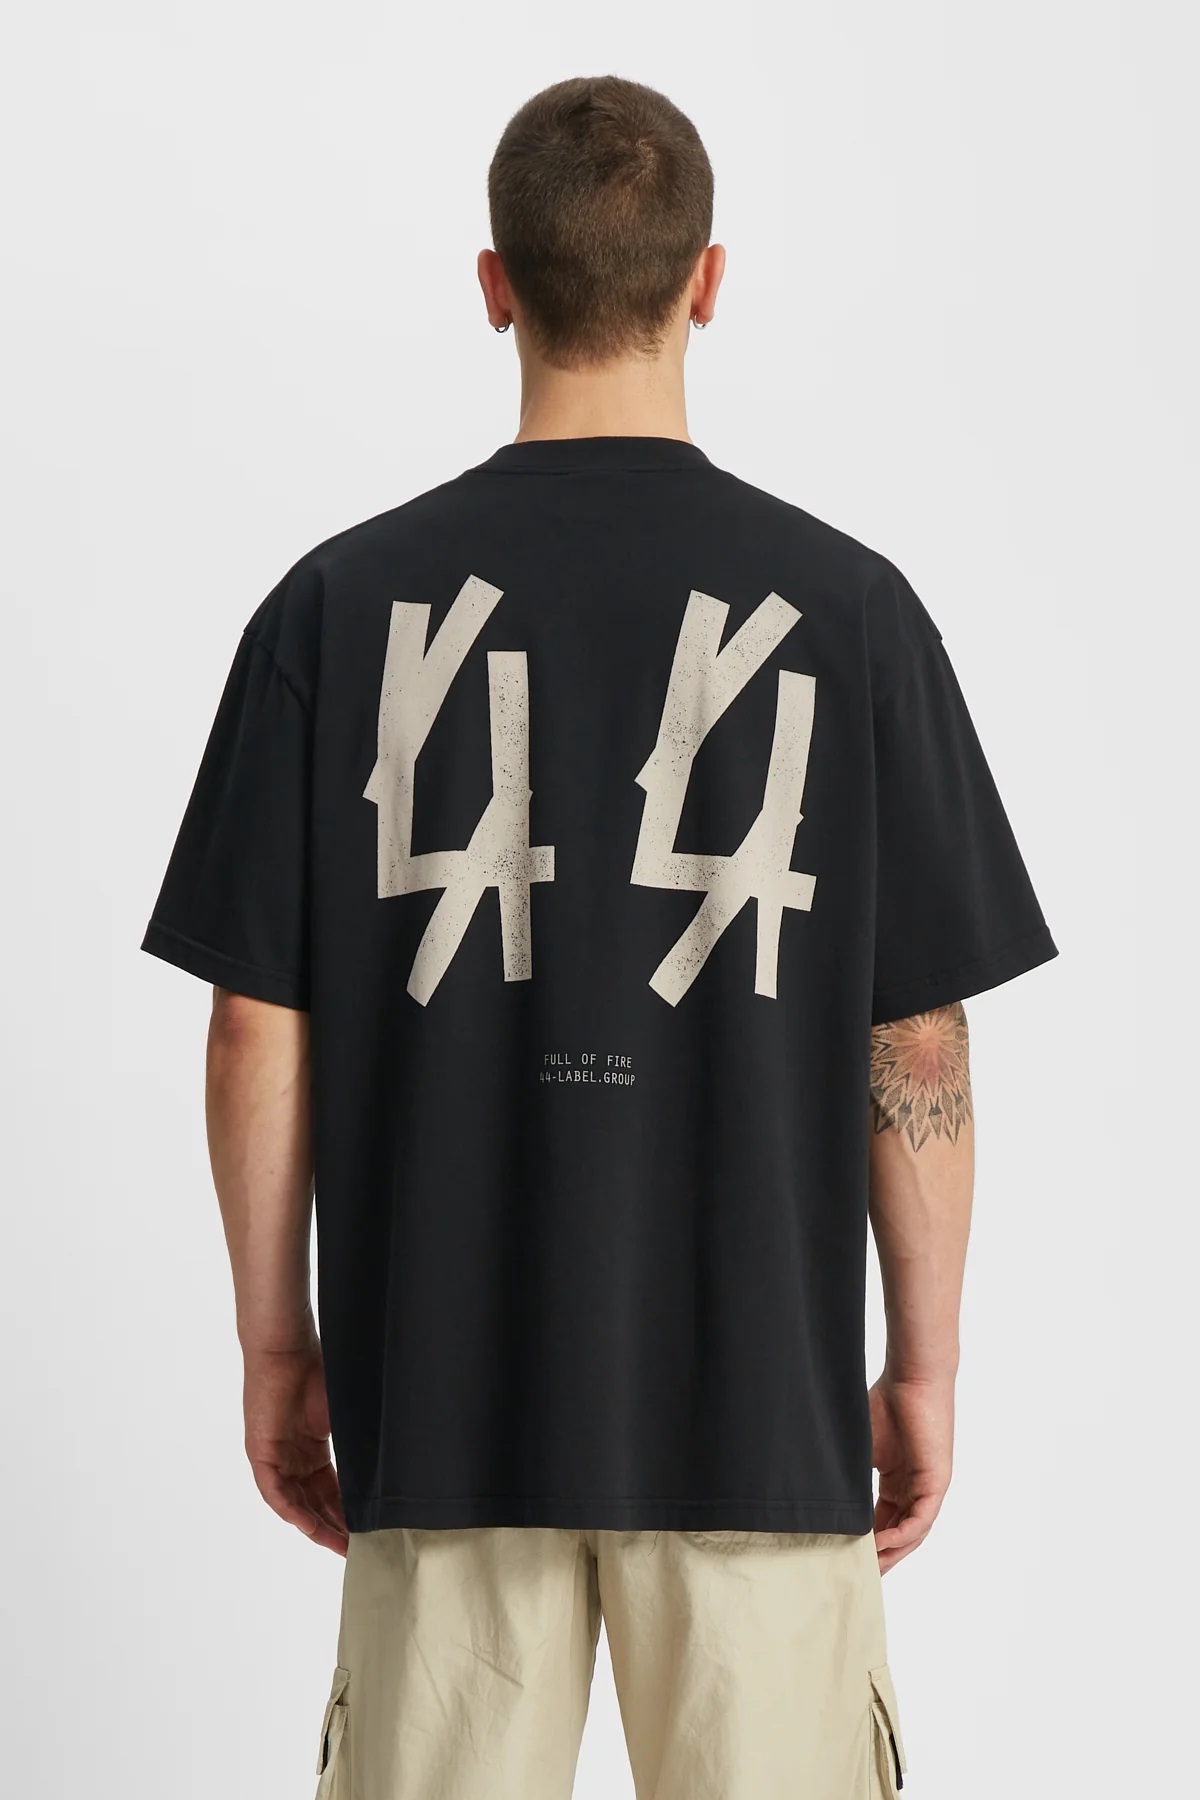 44 LABEL GROUP Guest List T-Shirt in Black